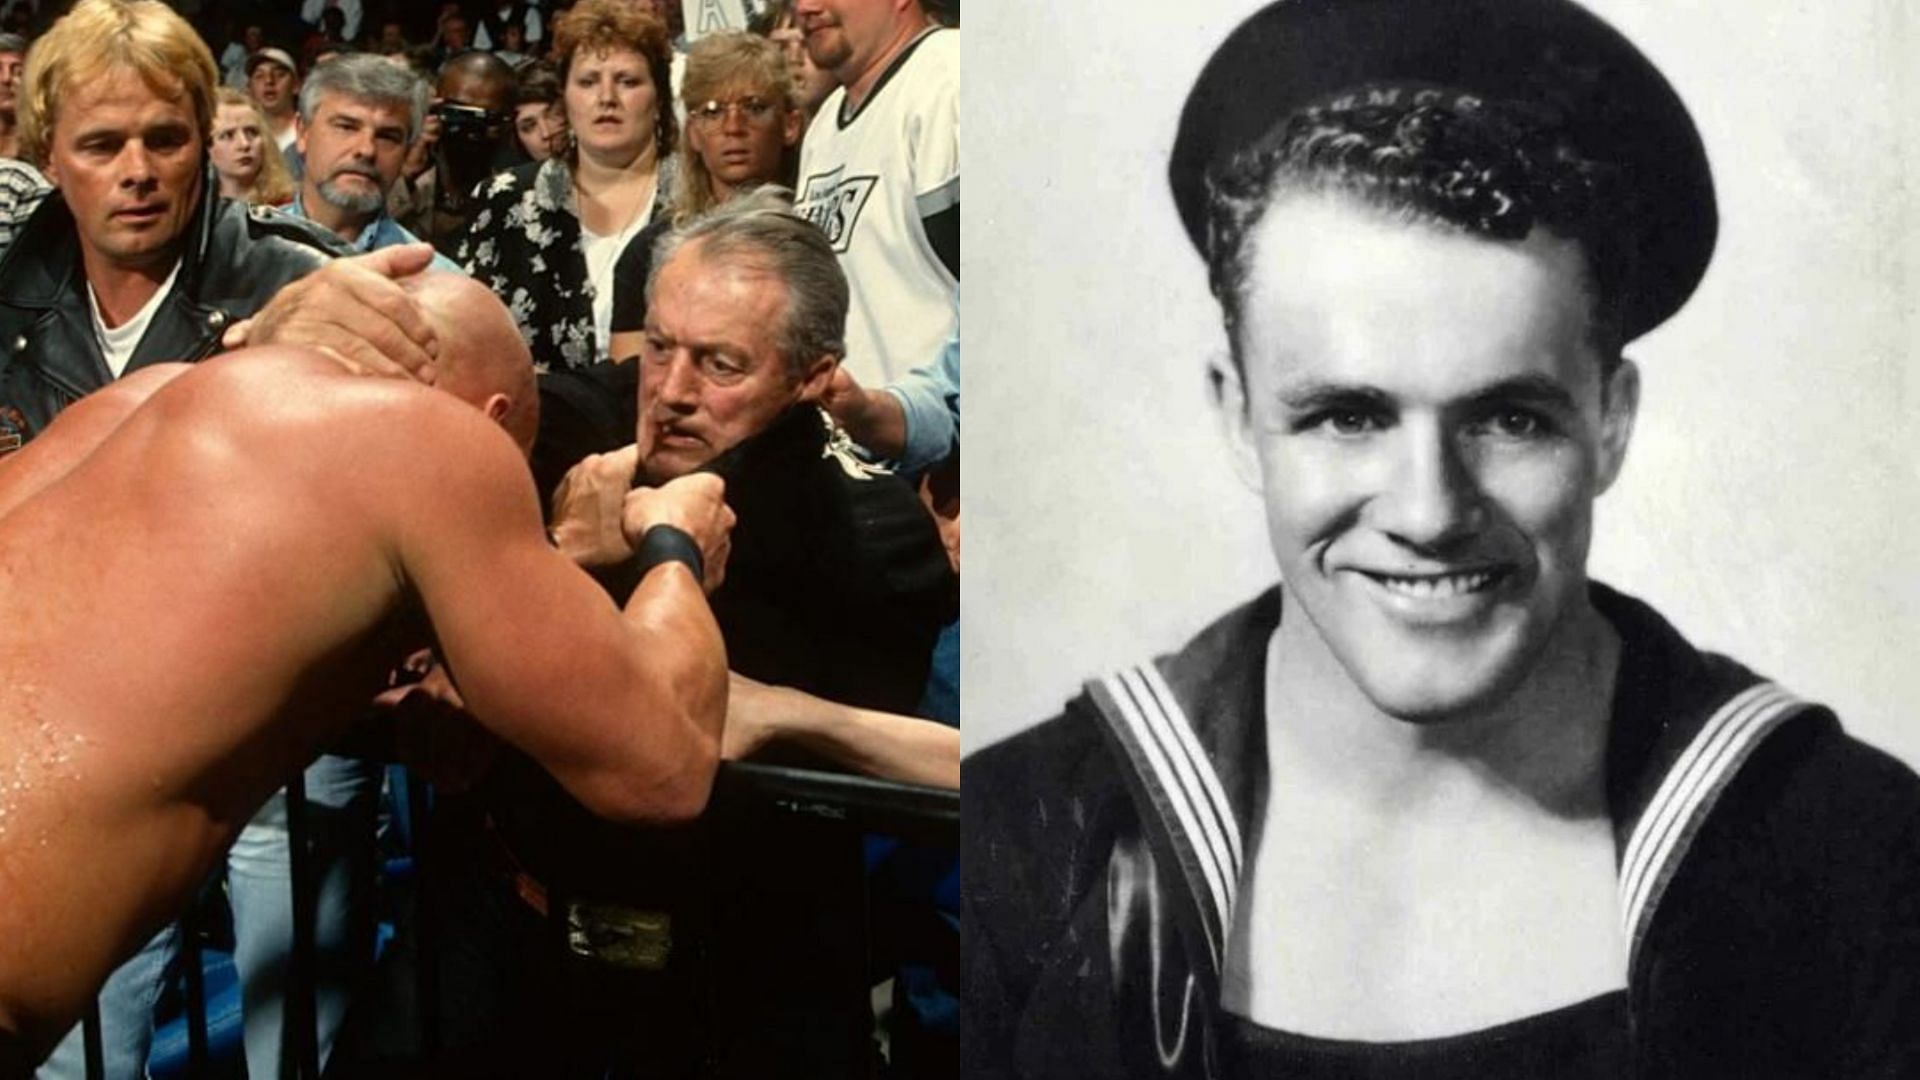 Stu Hart served in the Canadian Royal Navy during WWII